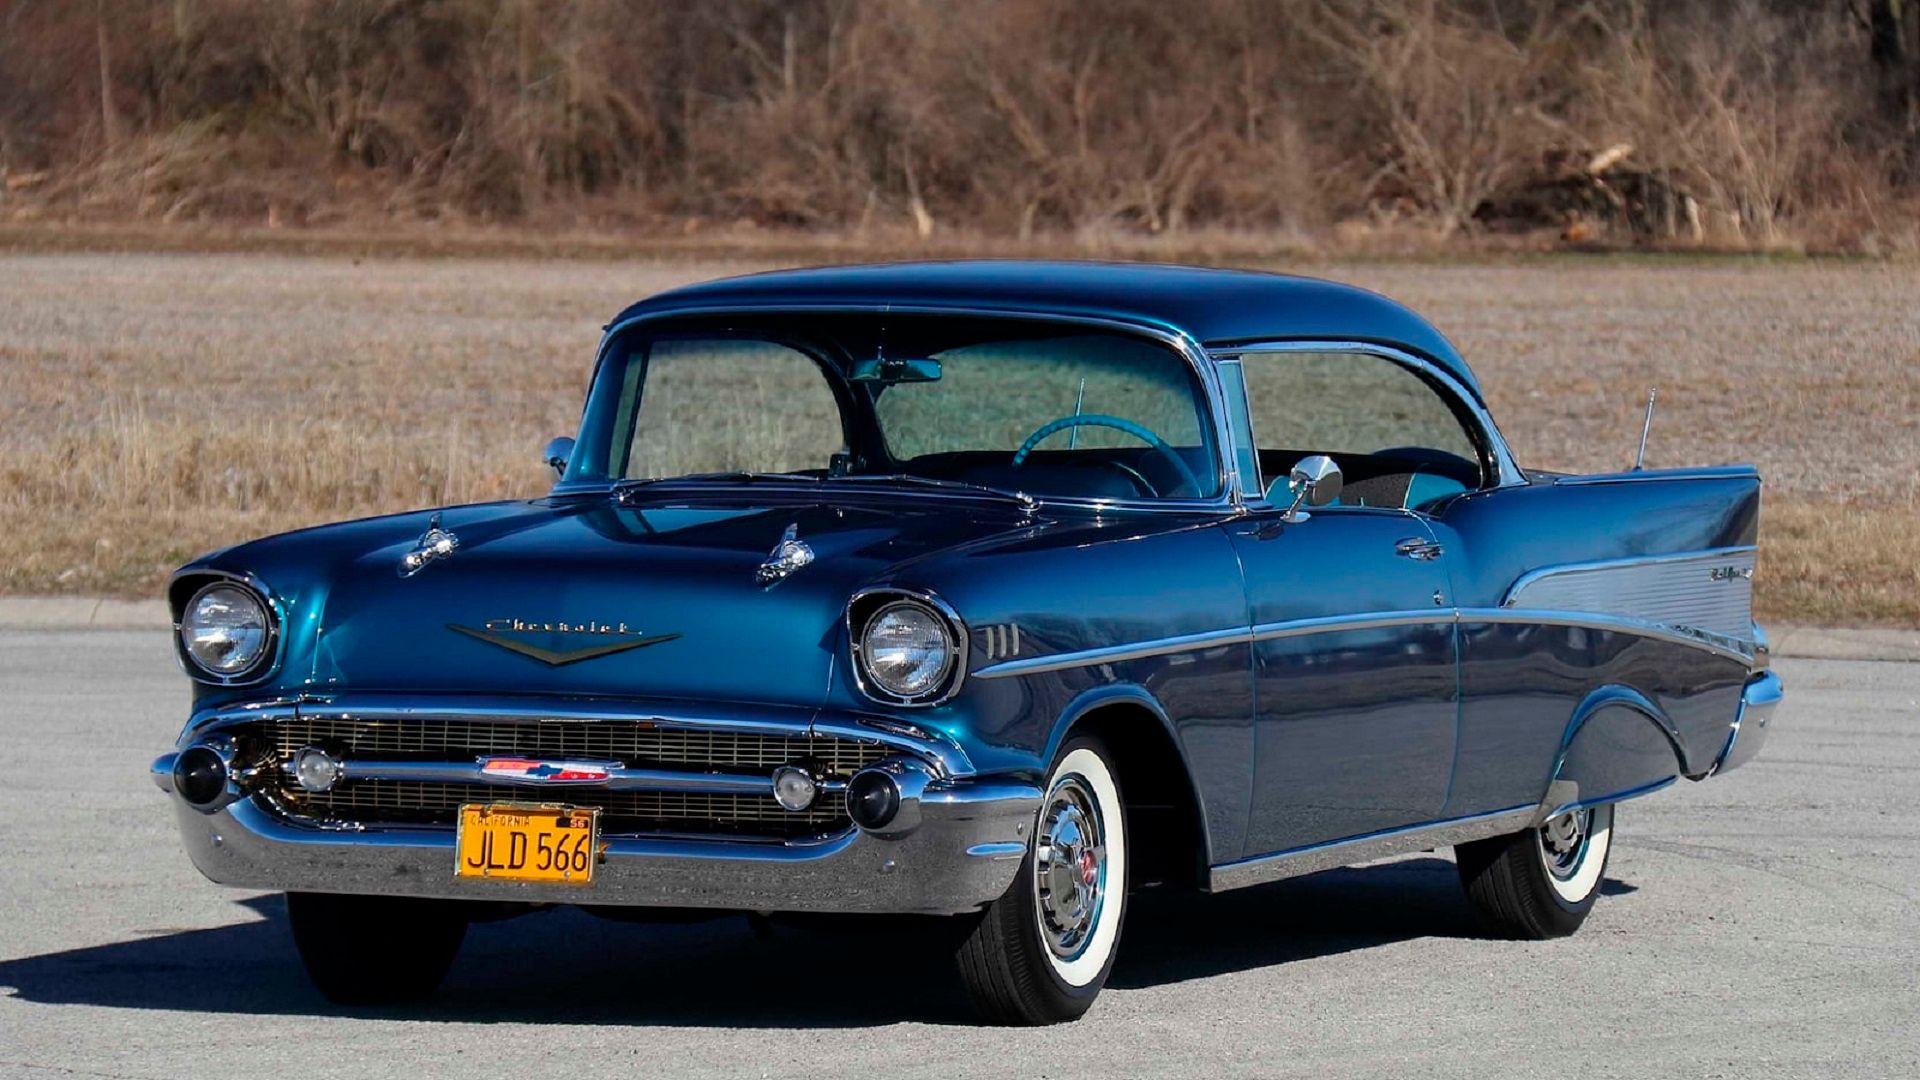 A parked 1957 Chevrolet Bel Air